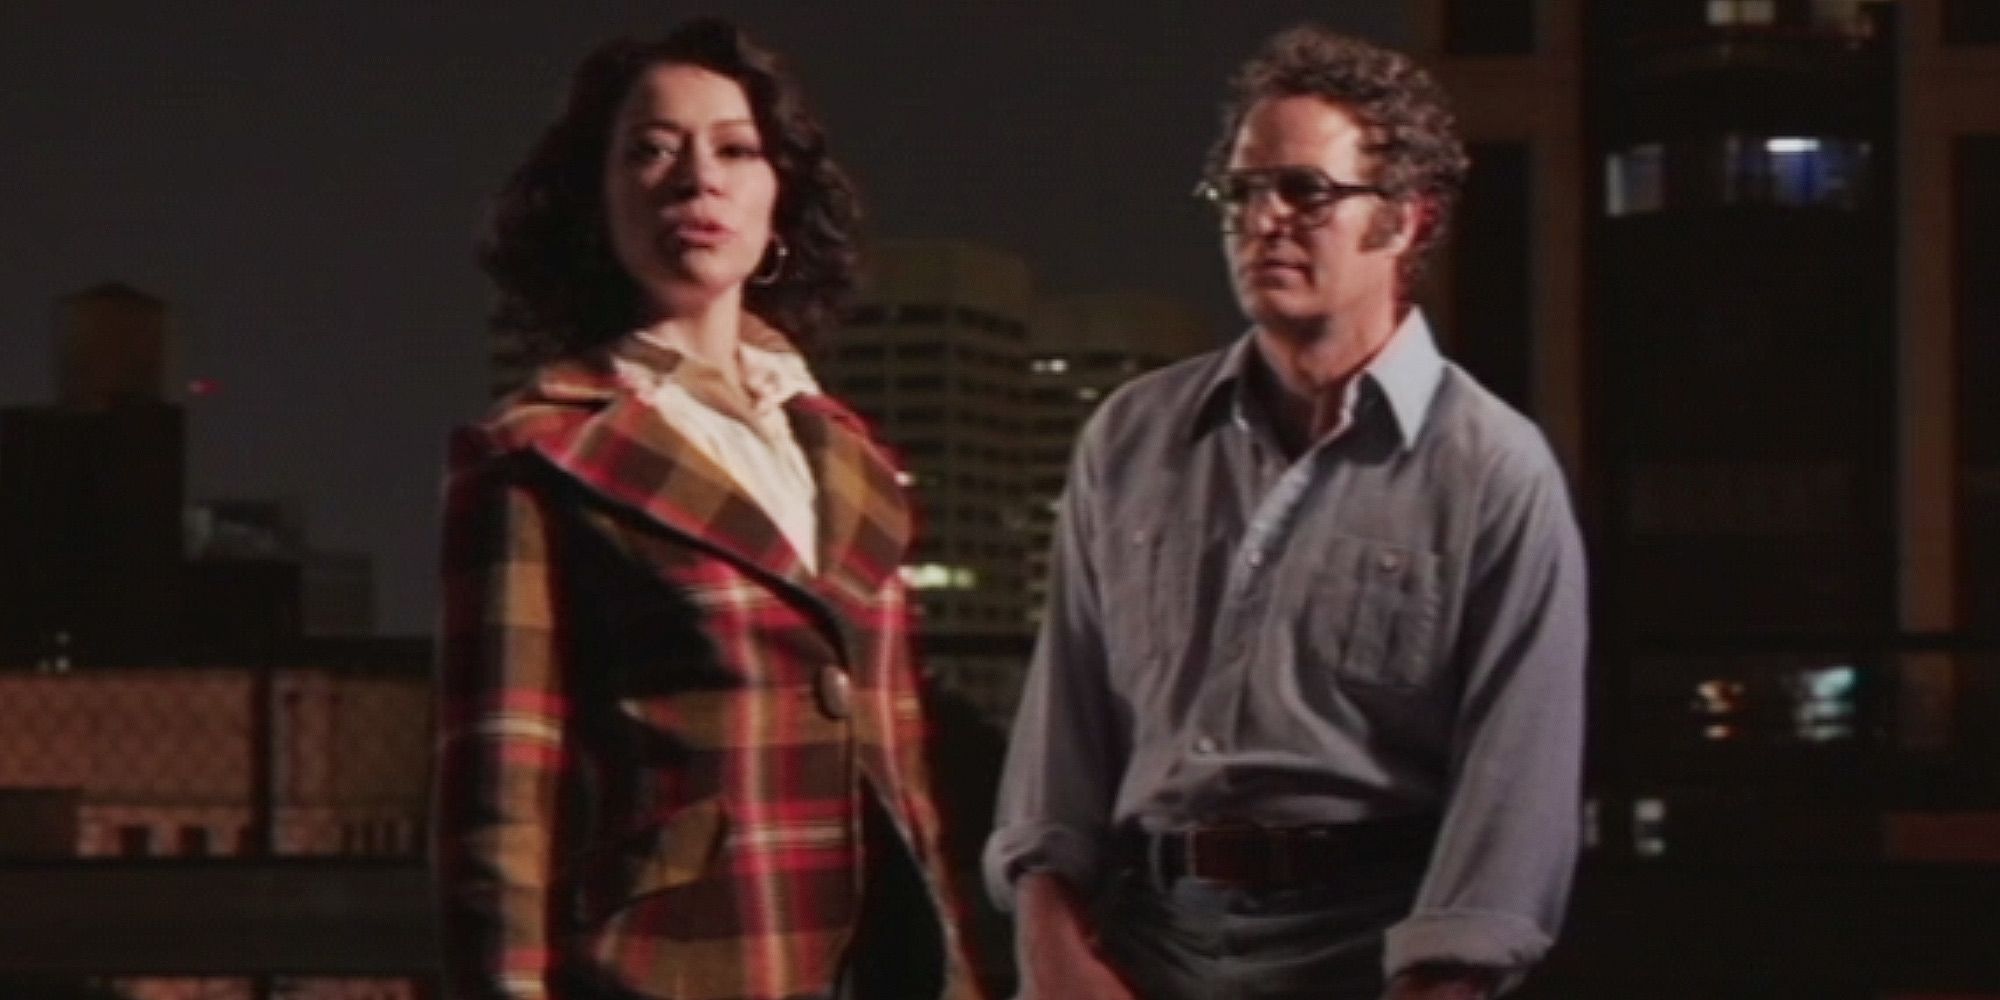 Jessica standing with Bruce Banner in She-Hulk